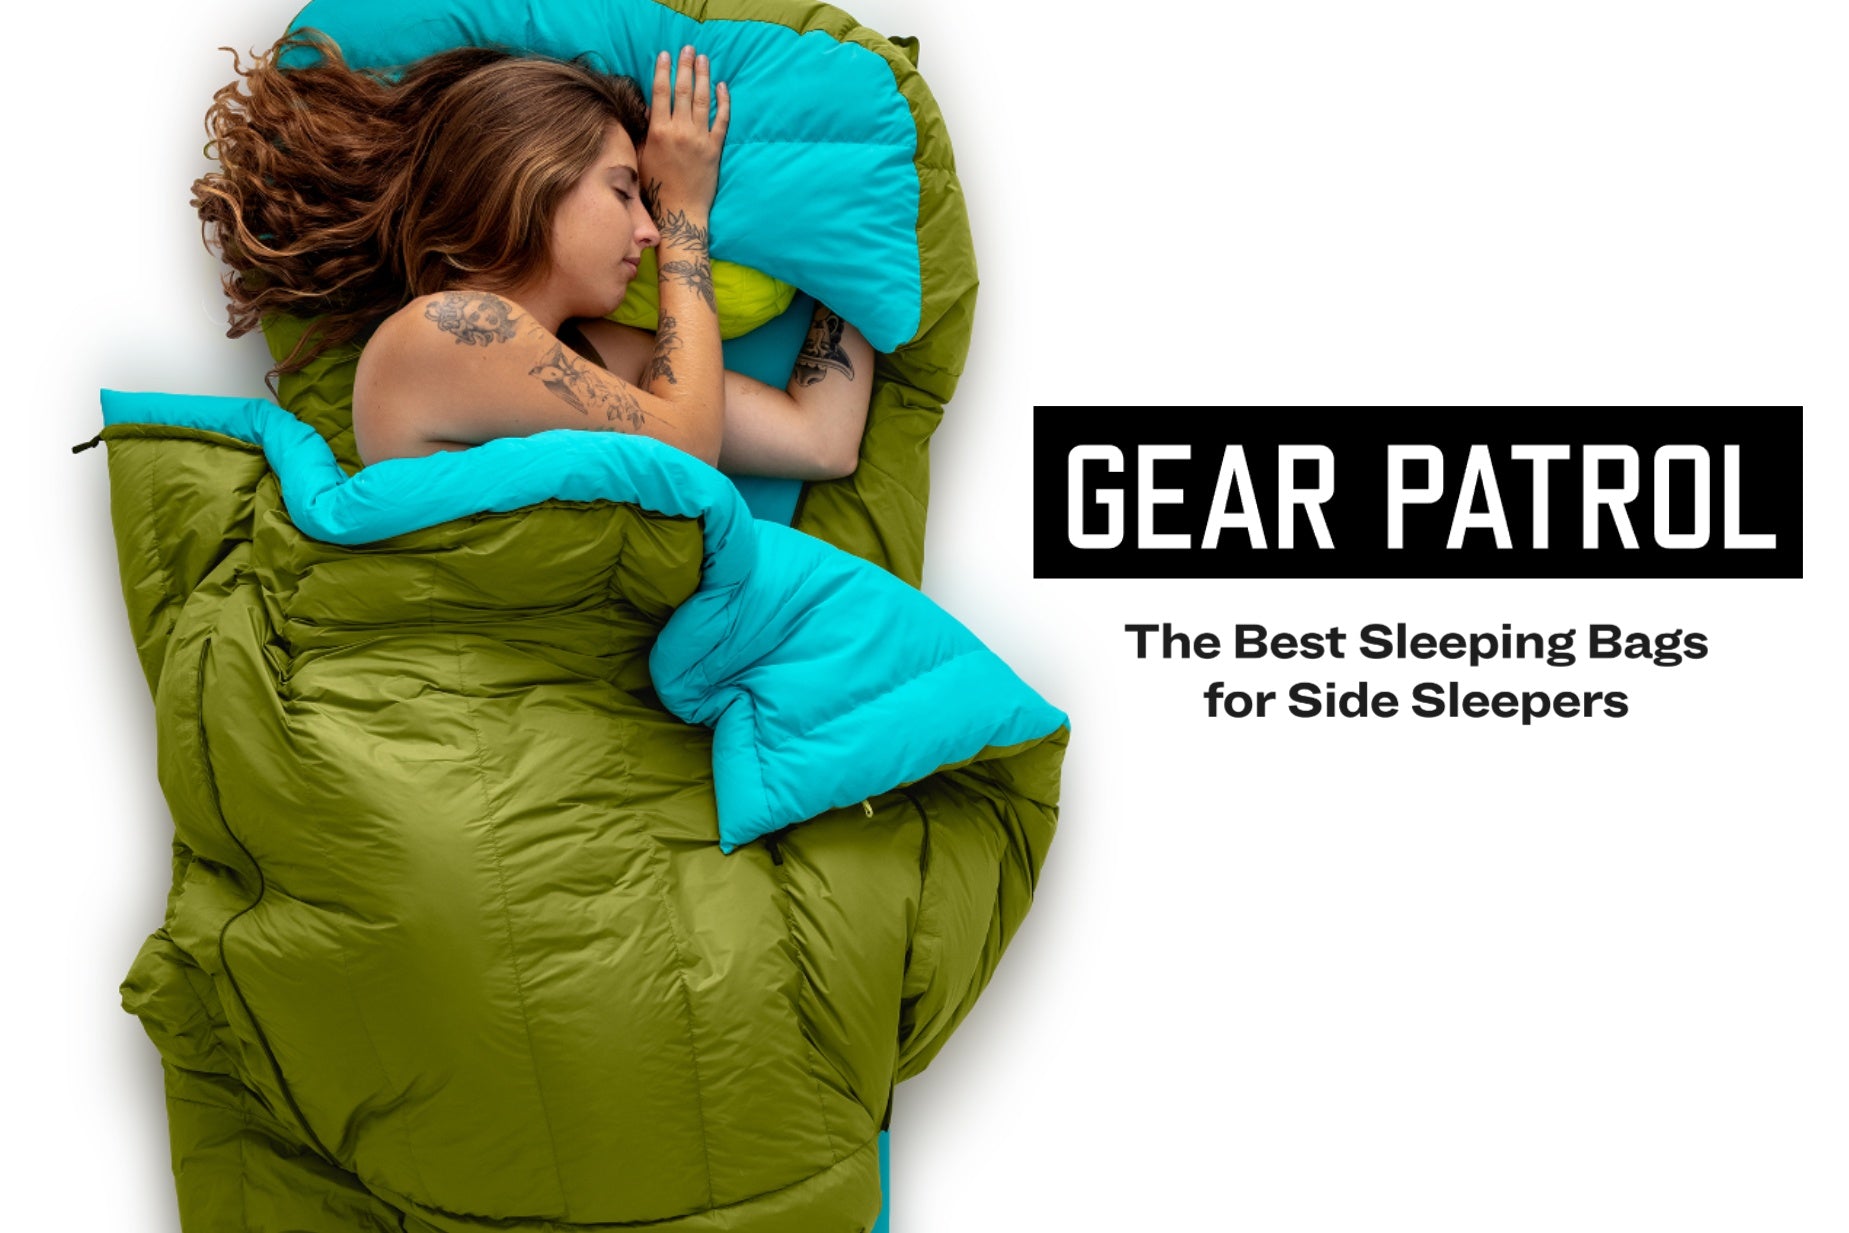 PRESS: The Best Sleeping Bags for Side Sleepers